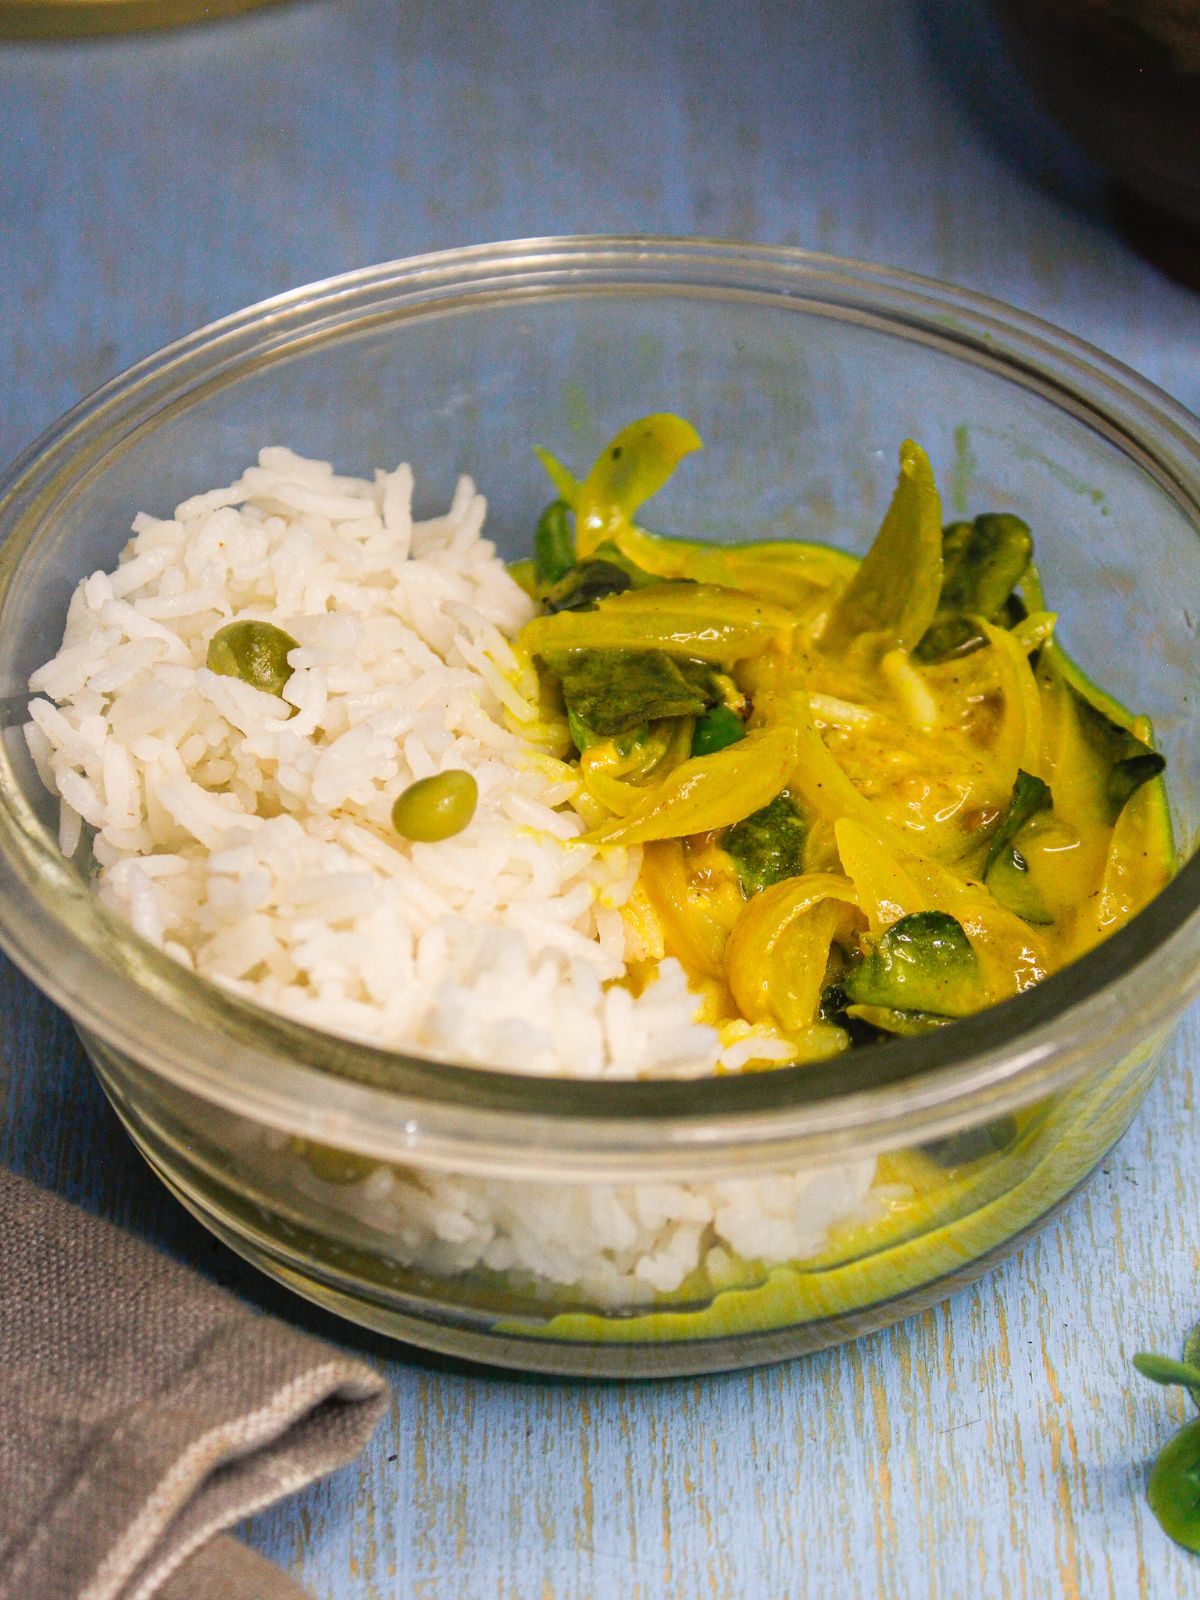 Hot Sri Lankan Coconut Milk Curry served with rice